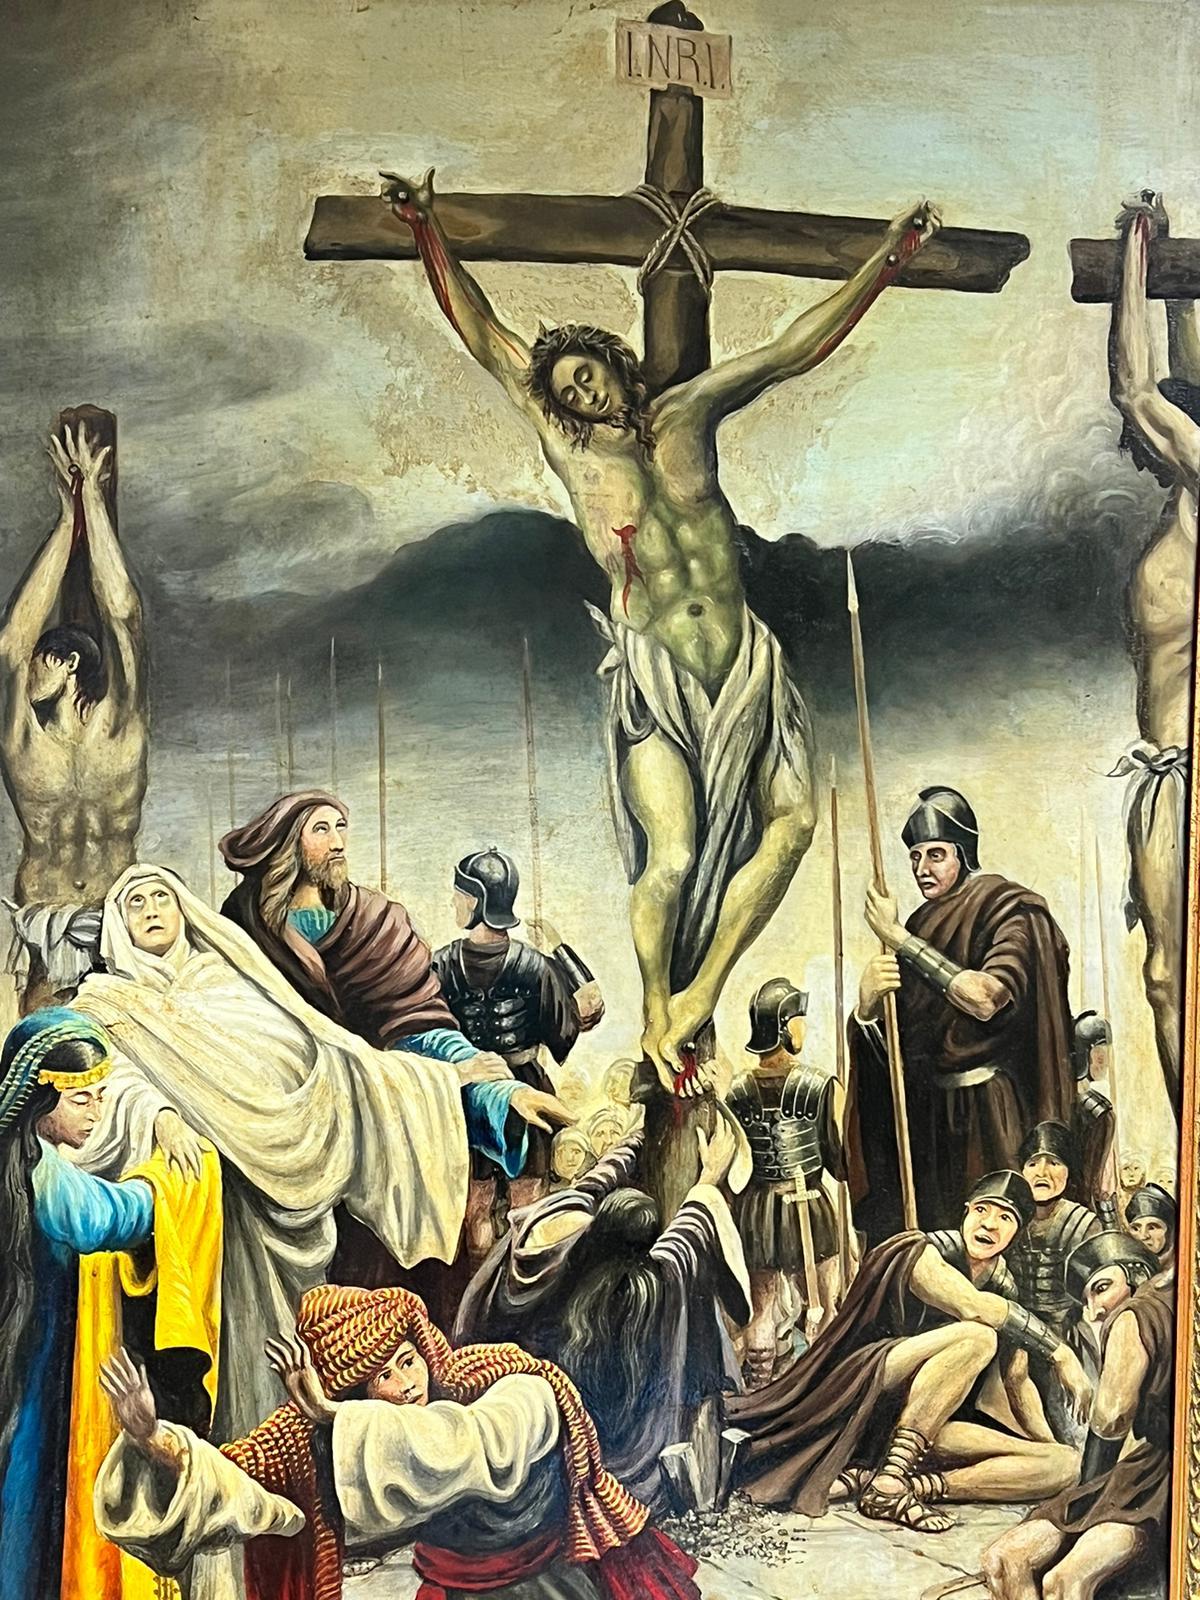 The Crucifixion
Flemish School, early 20th century
oil on board, framed
framed: 46 x 32 inches
board: 43 x 29 inches
provenance: UK collection
The painting is in good and presentable condition.
